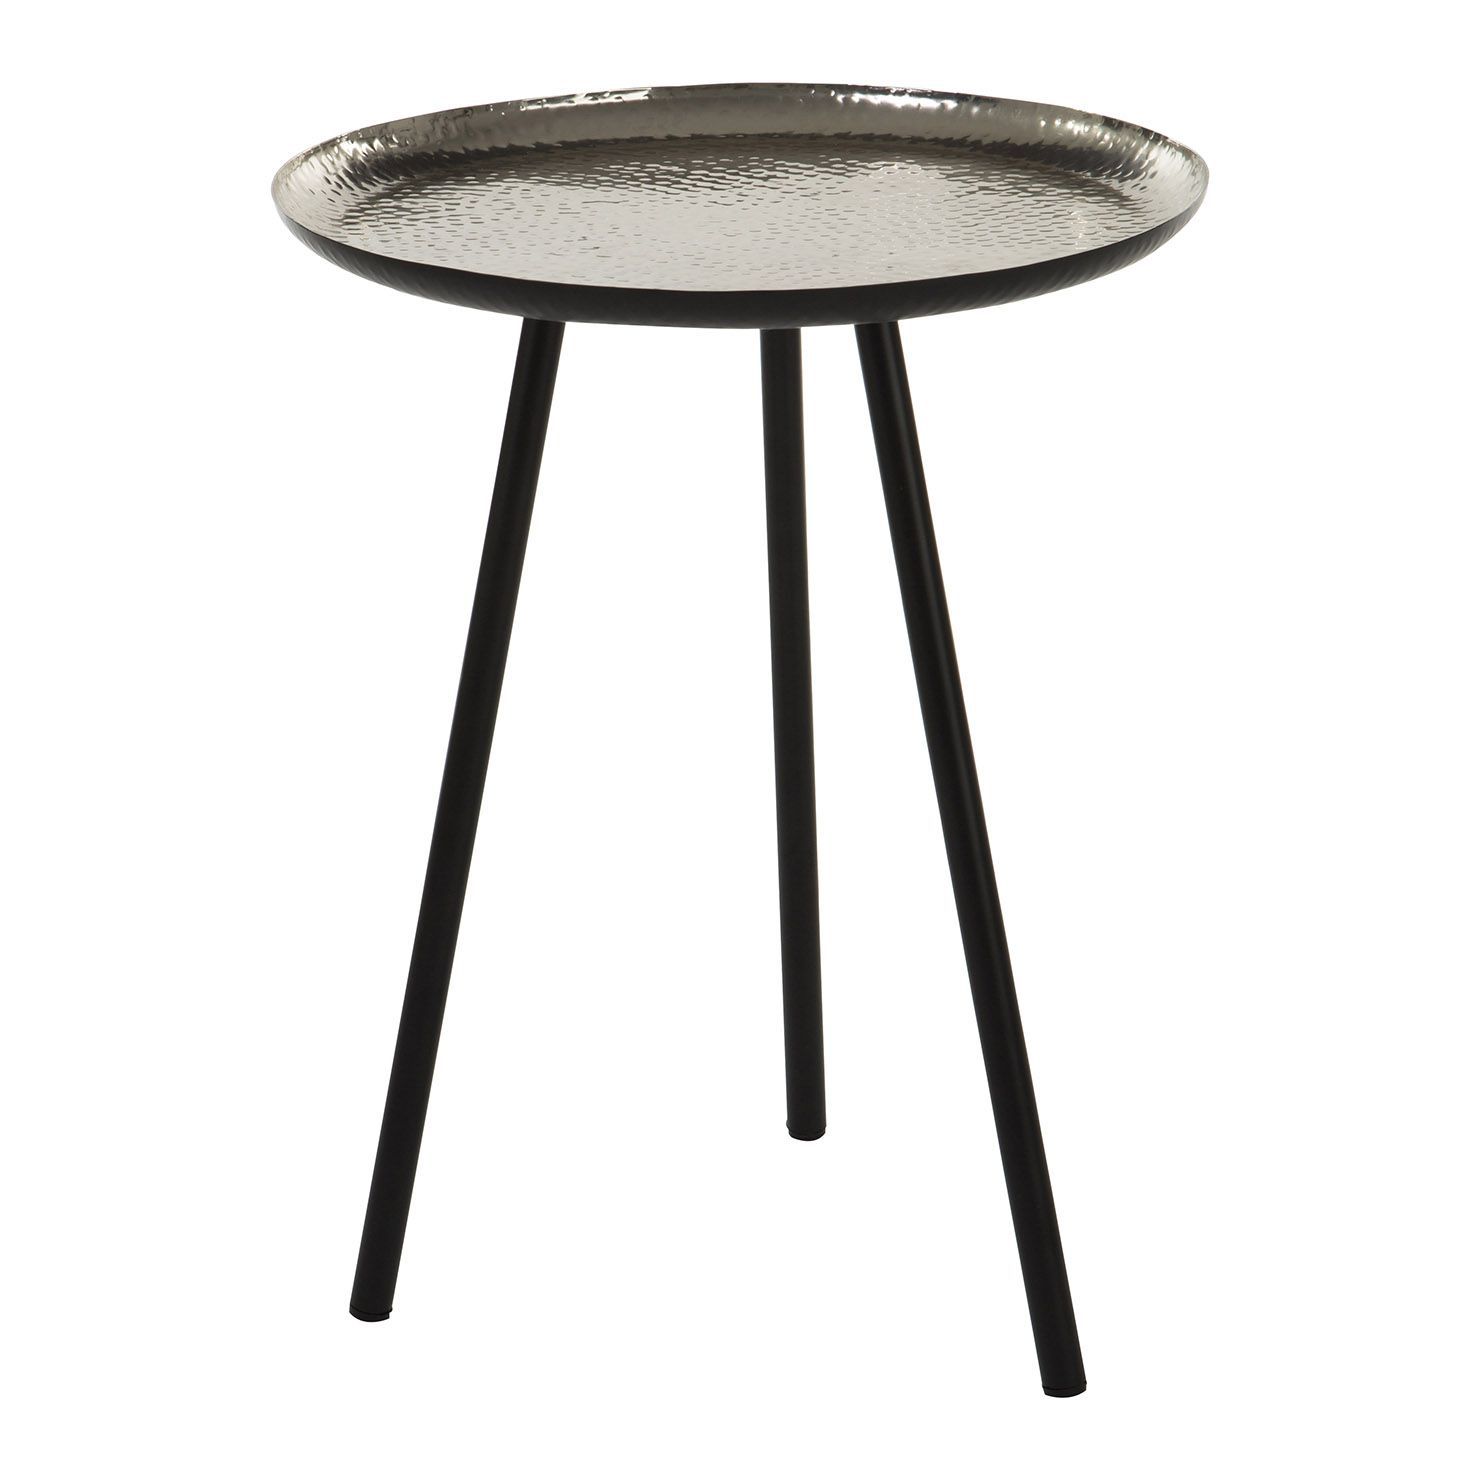 Round Metal Side Table | Achica | Side Table, Round Metal Side Table, Table Pertaining To Metal Side Tables For Living Spaces (View 8 of 20)